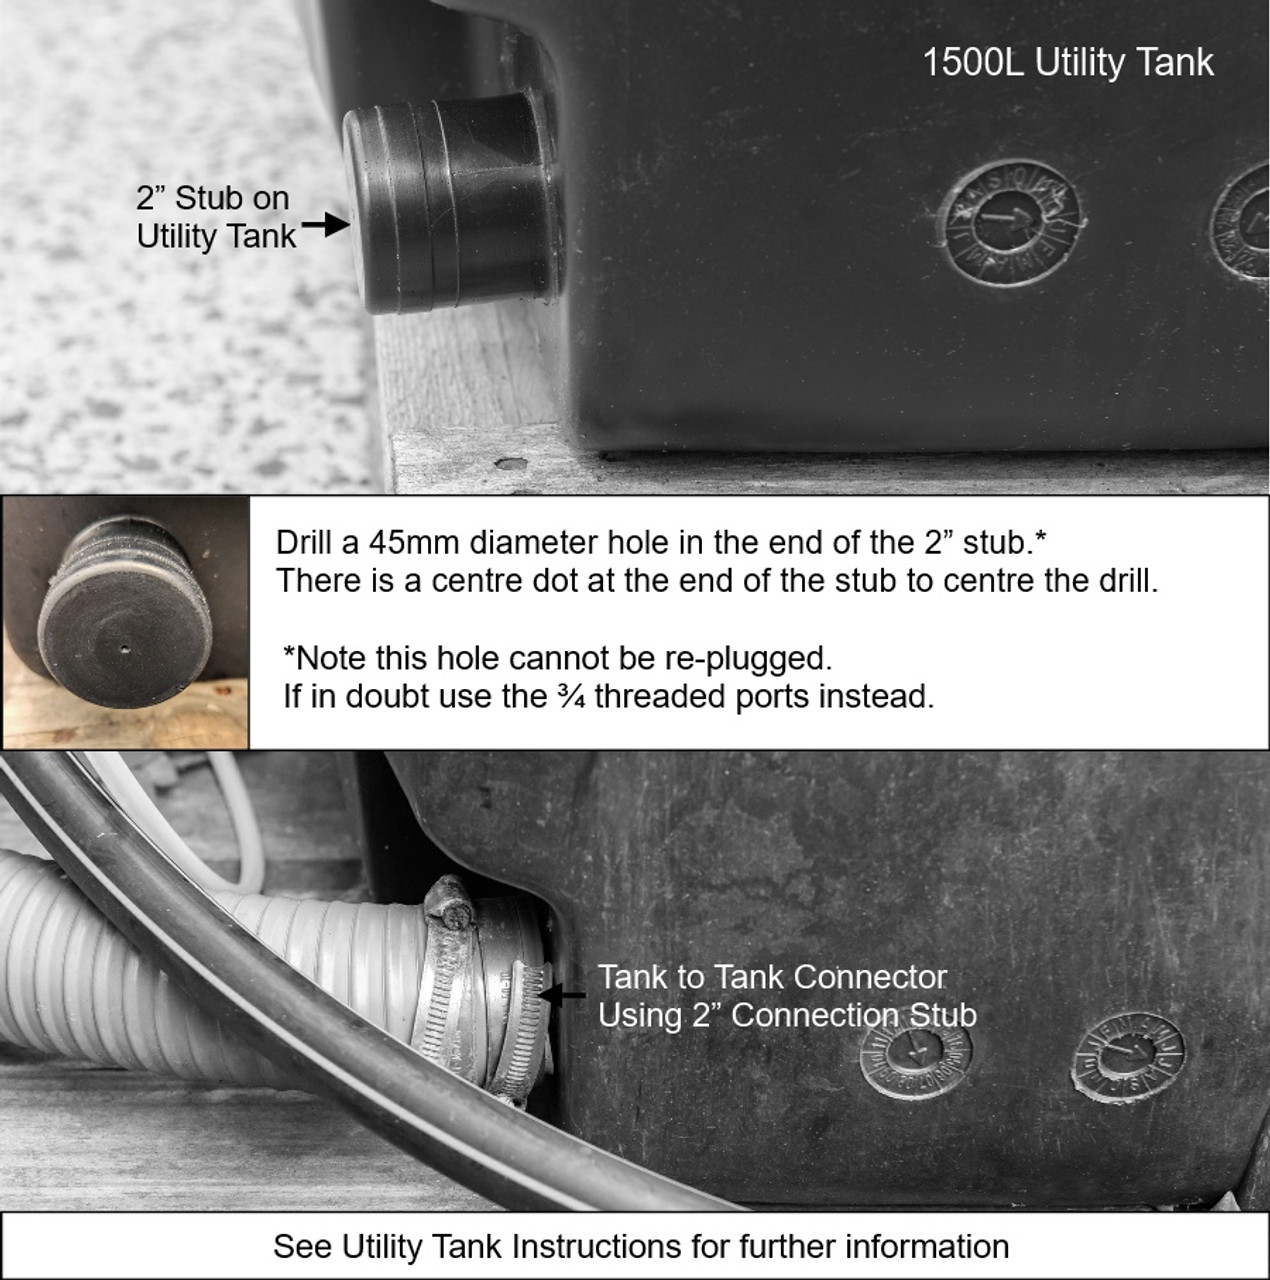 Showing how to drill and connect the Utility Tanks together. Further information is available on the Utility Tank Instructions.